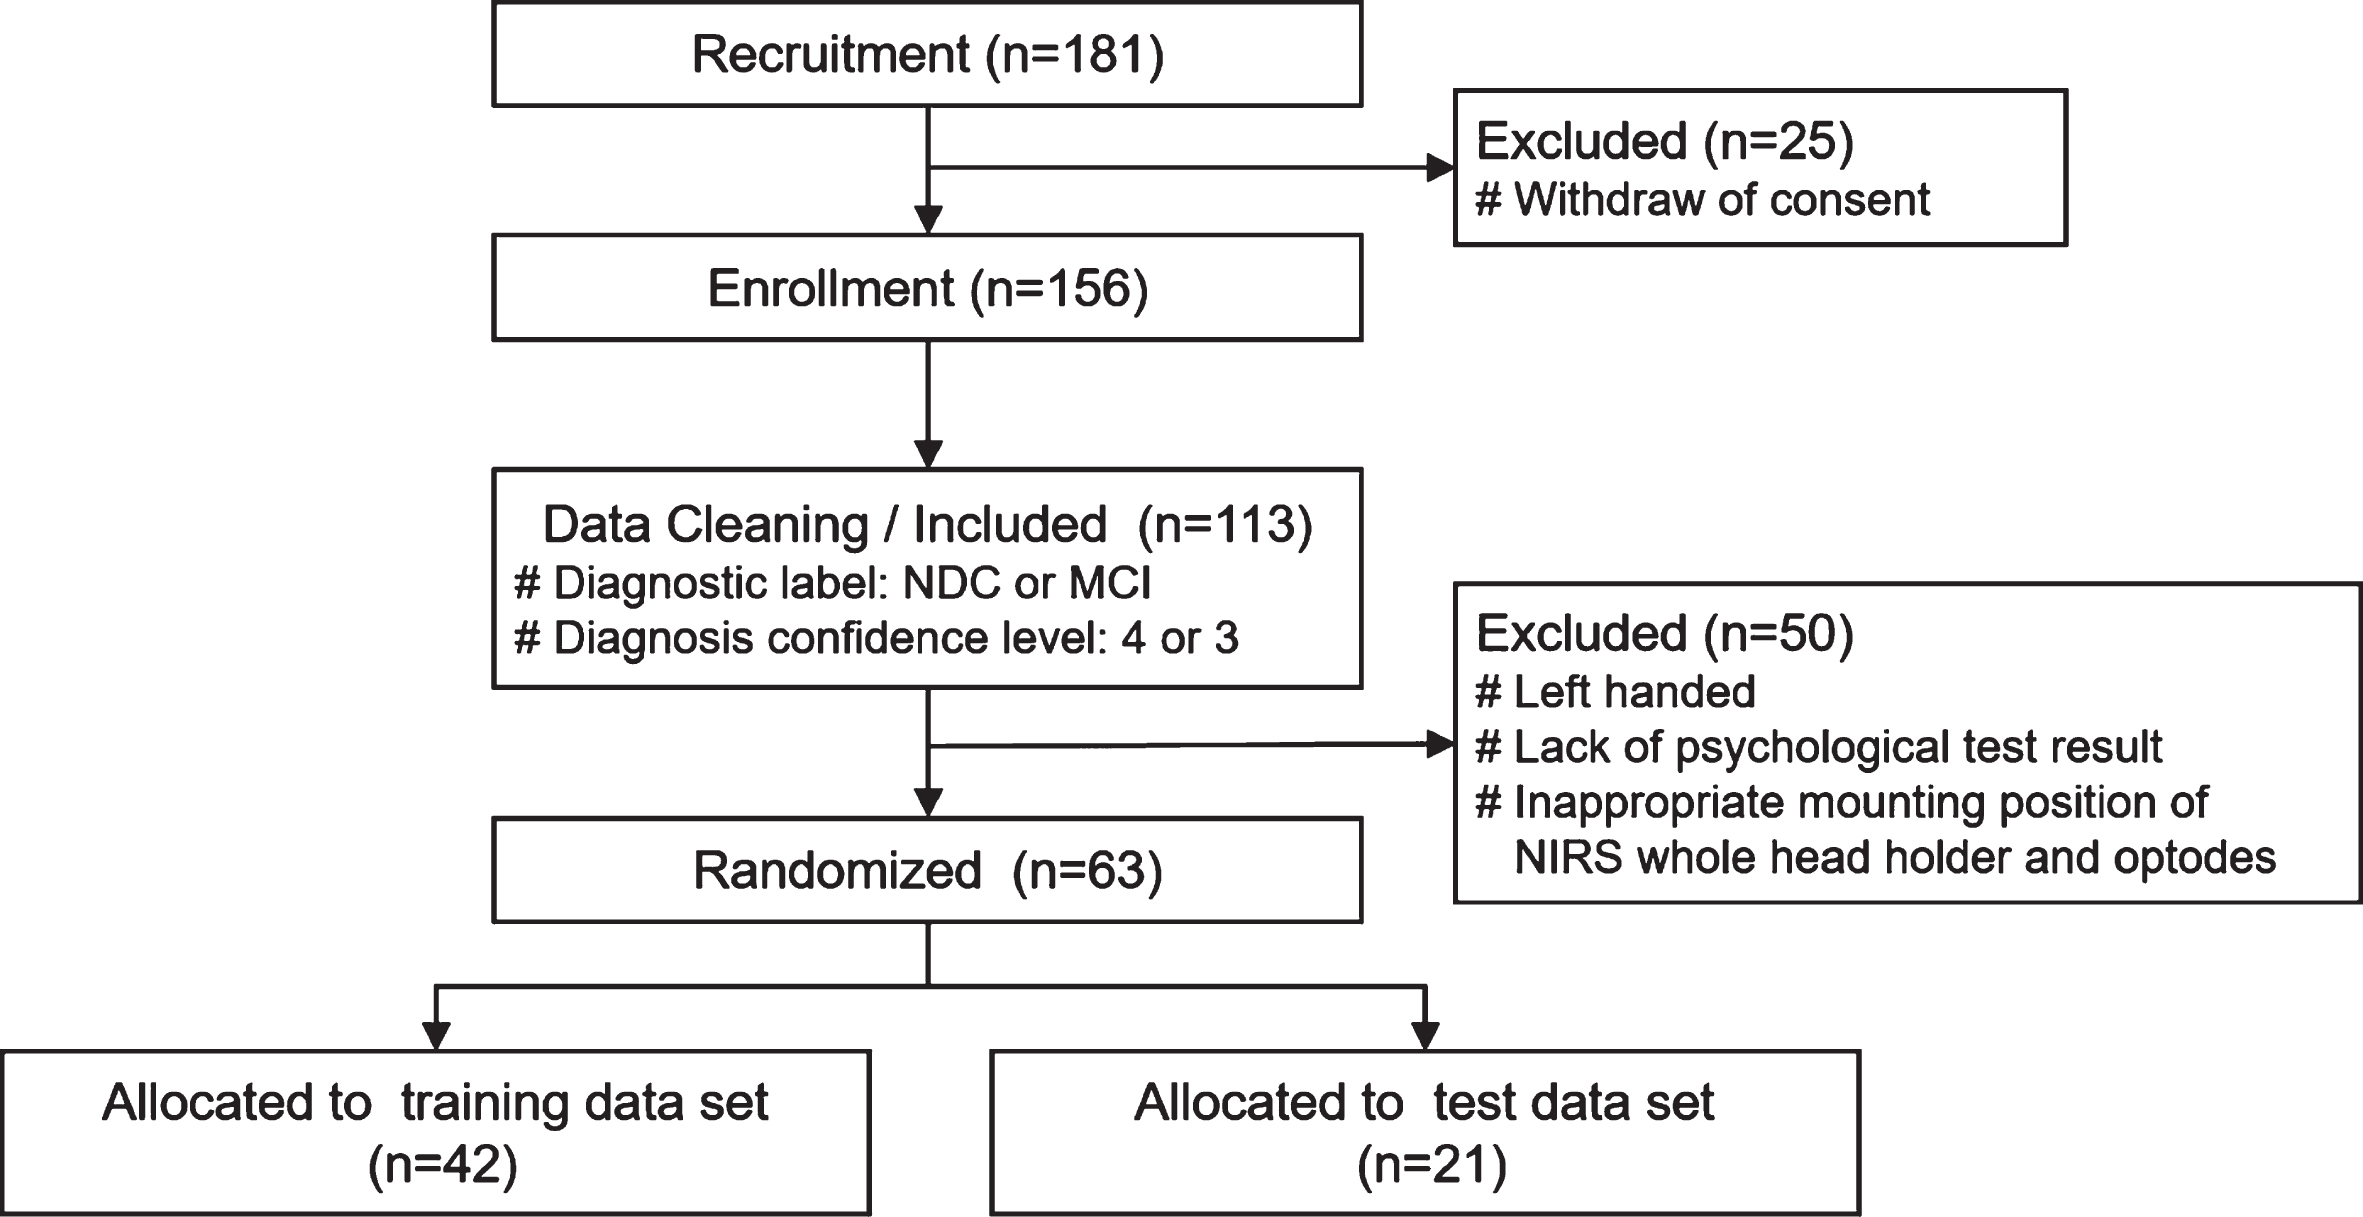 Flowchart representing the study participants and data cleaning. 181 healthy volunteers, outpatients and their partners aged between 60 and 80 years were recruited and diagnosed in the Memory Clinic. After fNIRS measurement of enrolled 156 participants, 63 subject data were selected according to the inclusion and exclusion criteria, and randomly assigned in a ratio of 2:1 to two data sets as follows: 42 to the training data set and 21 to the test data set. MCI, mild cognitive impairment; NDC, non-dementia control.